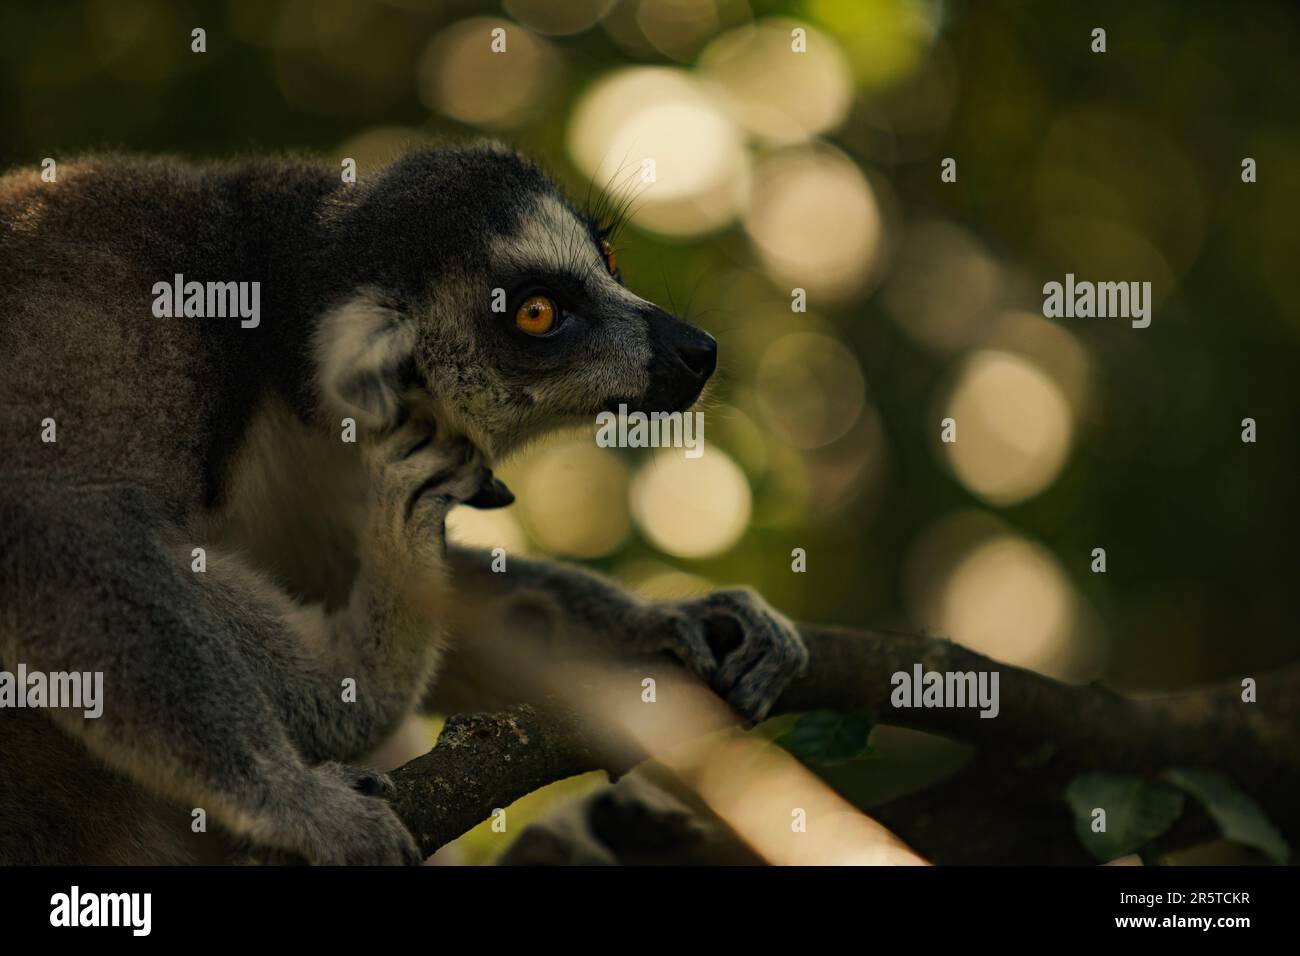 A curious lemur perches on a branch and surveys its surroundings with a thoughtful gaze Stock Photo